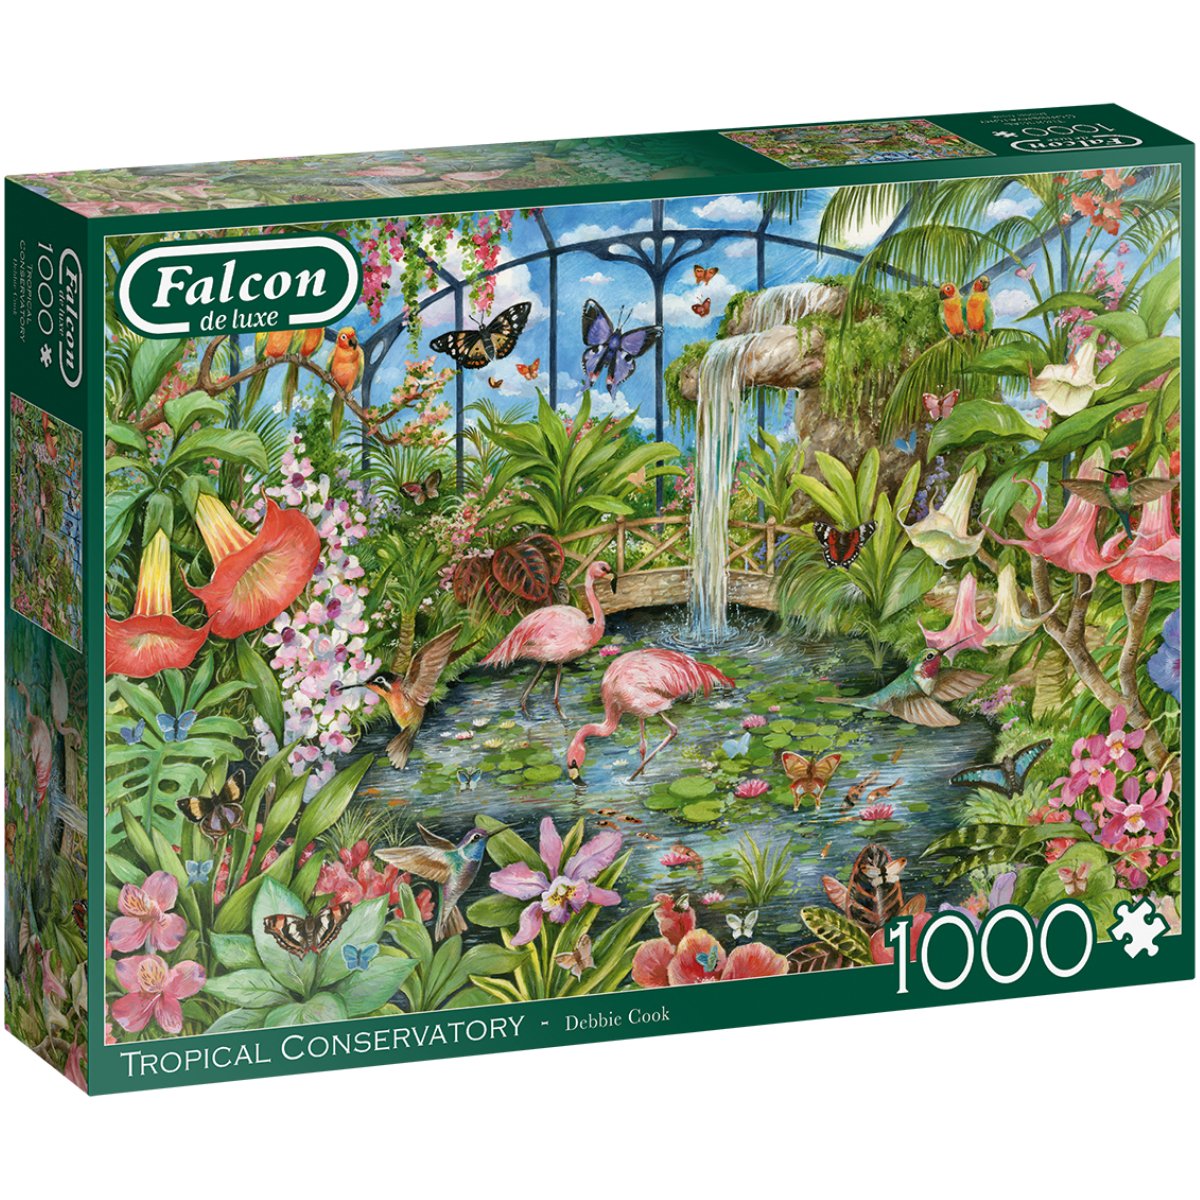 Falcon Tropical Conservatory Jigsaw Puzzle (1000 Pieces)